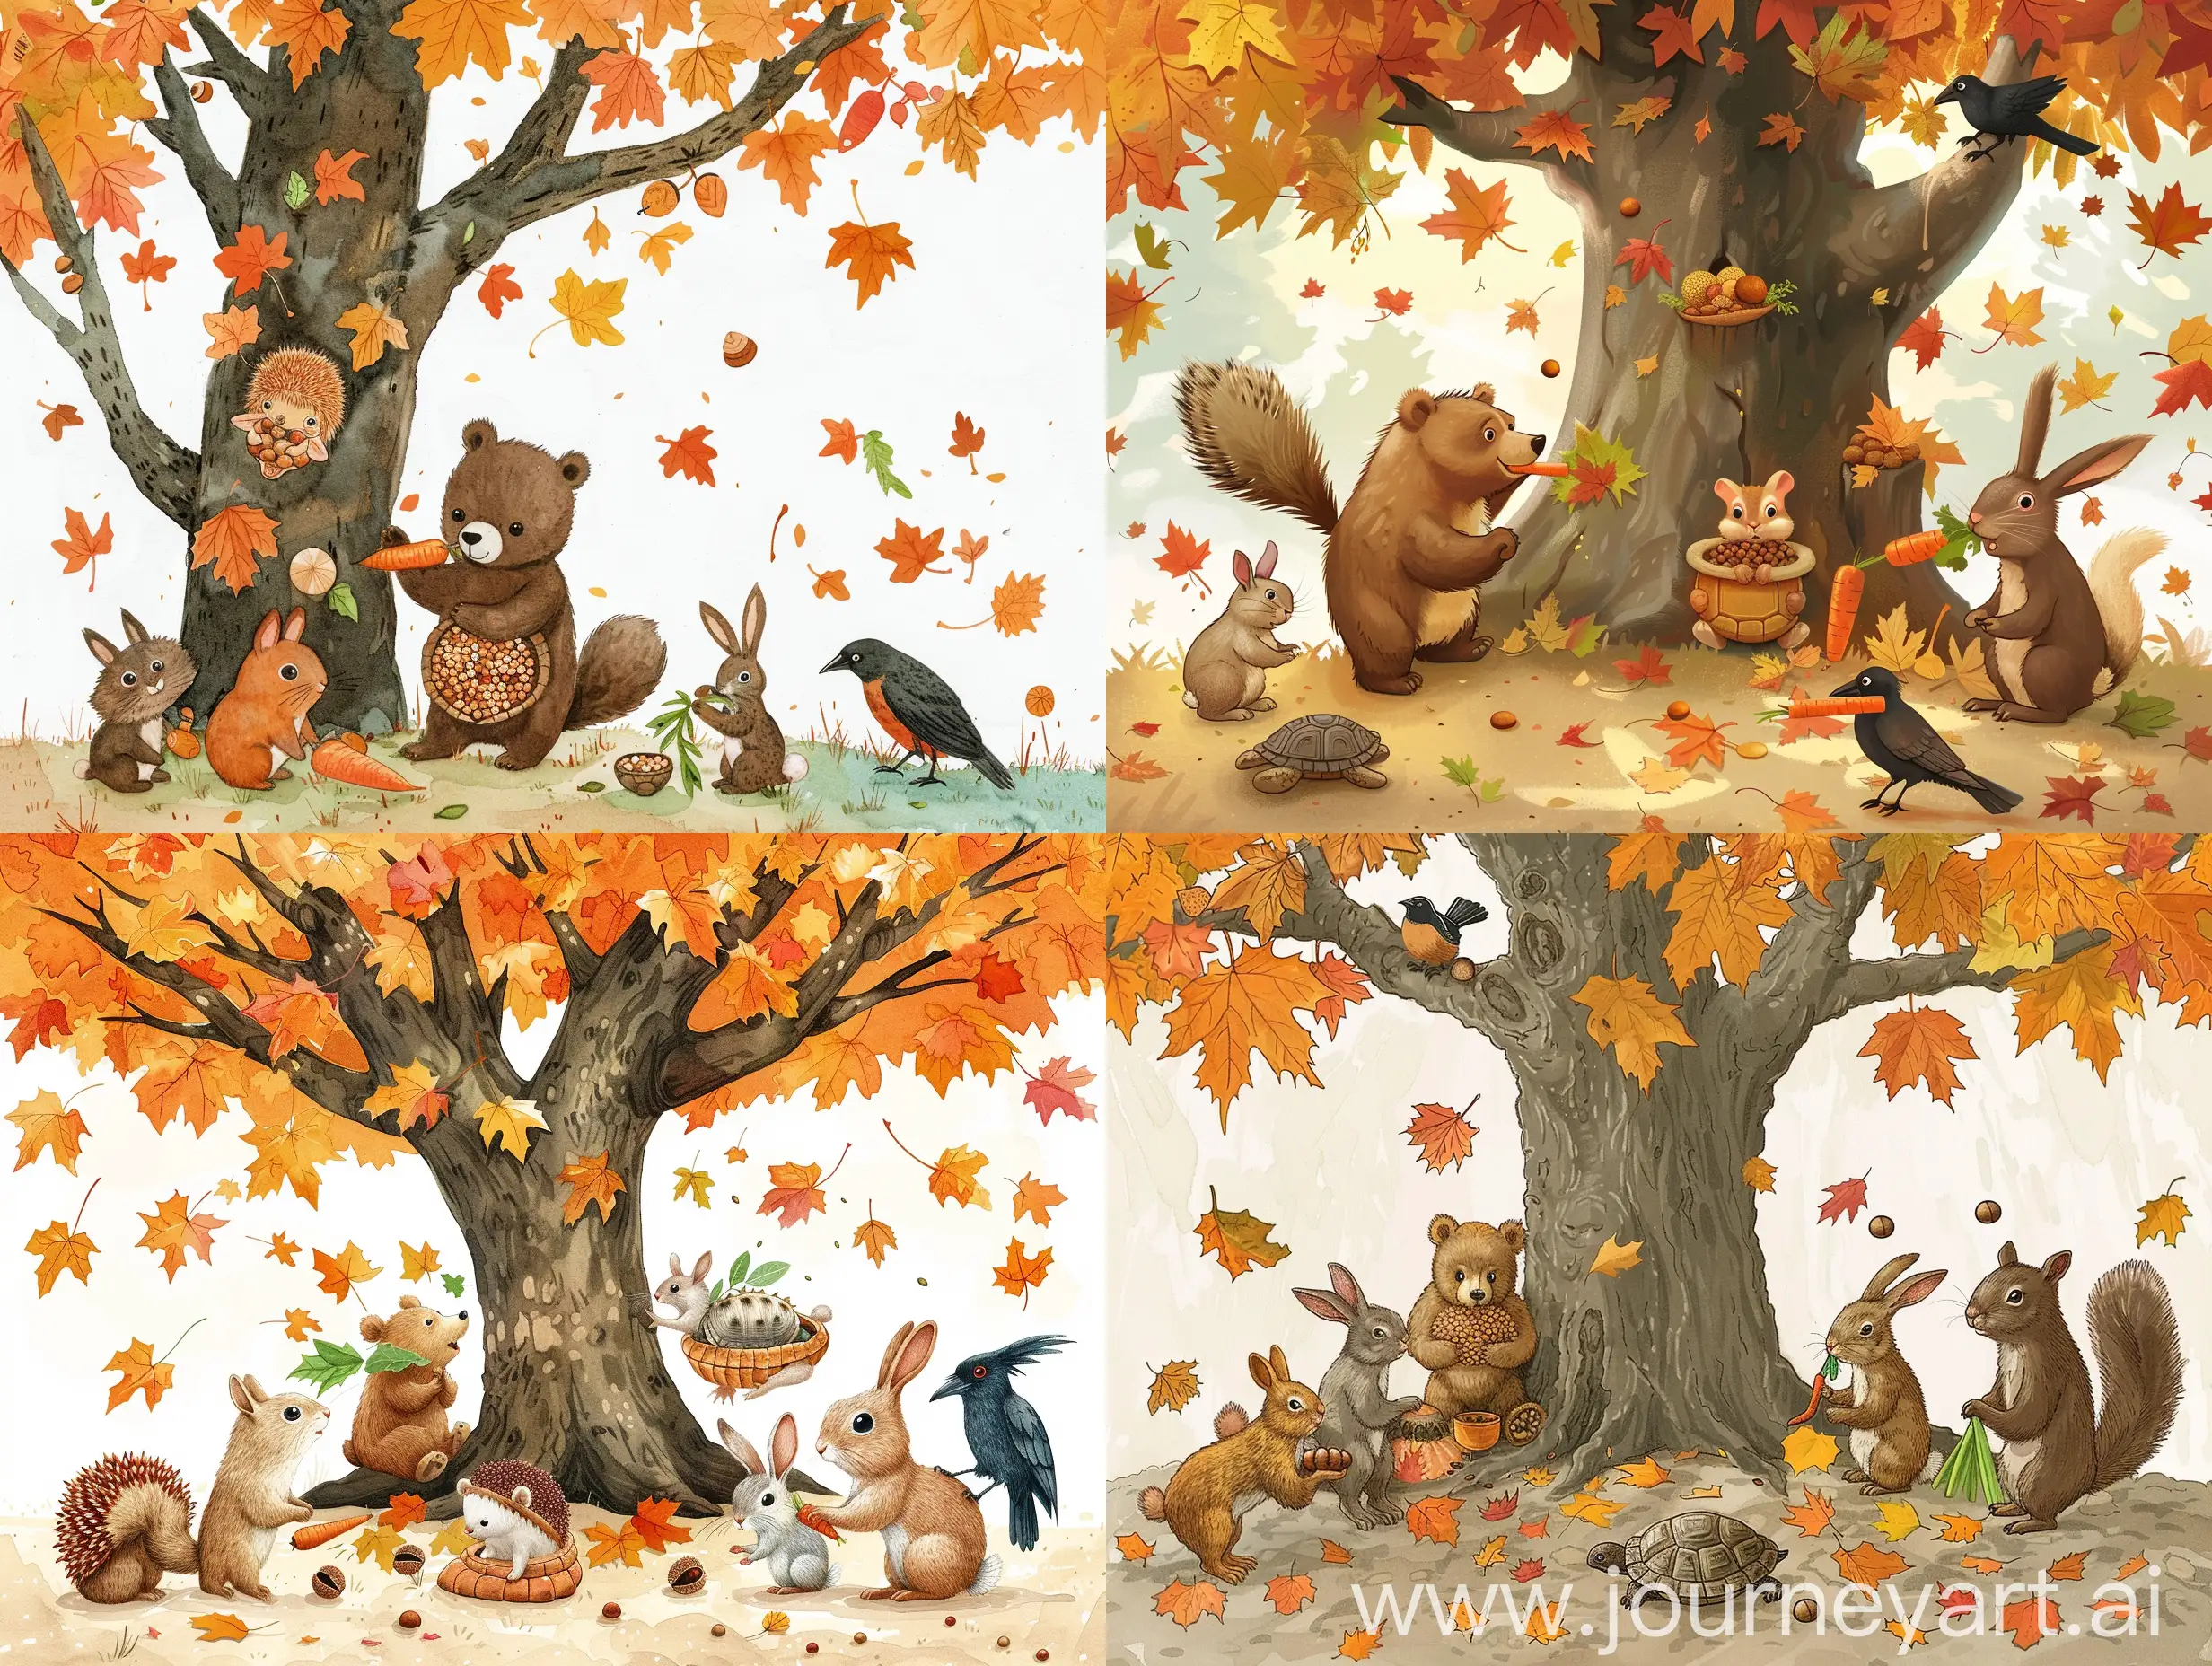 Create an enchanting illustration depicting a scene under a big chestnut tree where a little bear, surrounded by all his friends, is surprised to find the tree has shed all its leaves. Capture the bustling activity as each animal is carrying something special to their nests - a hedgehog picking hackberry grains, a squirrel with a lap full of acorns, a rabbit holding a carrot, a turtle carrying chard leaves in its mouth, and a crow collecting walnuts, slyly burying one without revealing its hiding spot. Bring out the vibrant colors of the autumn setting and the adorable expressions on the animals' faces